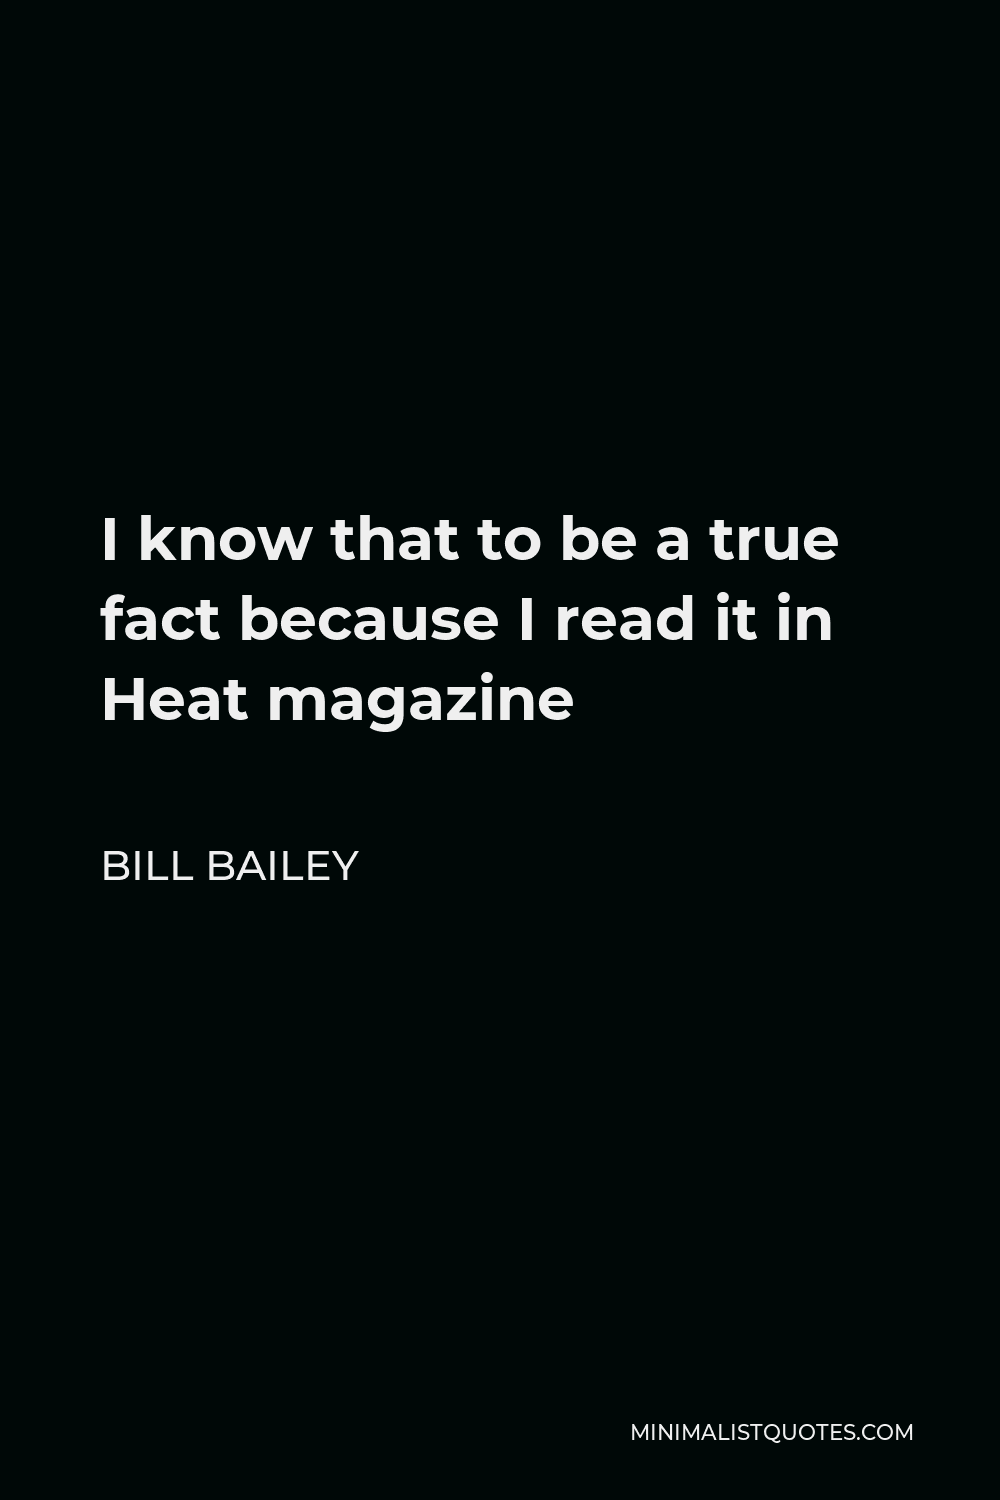 Bill Bailey Quote - I know that to be a true fact because I read it in Heat magazine